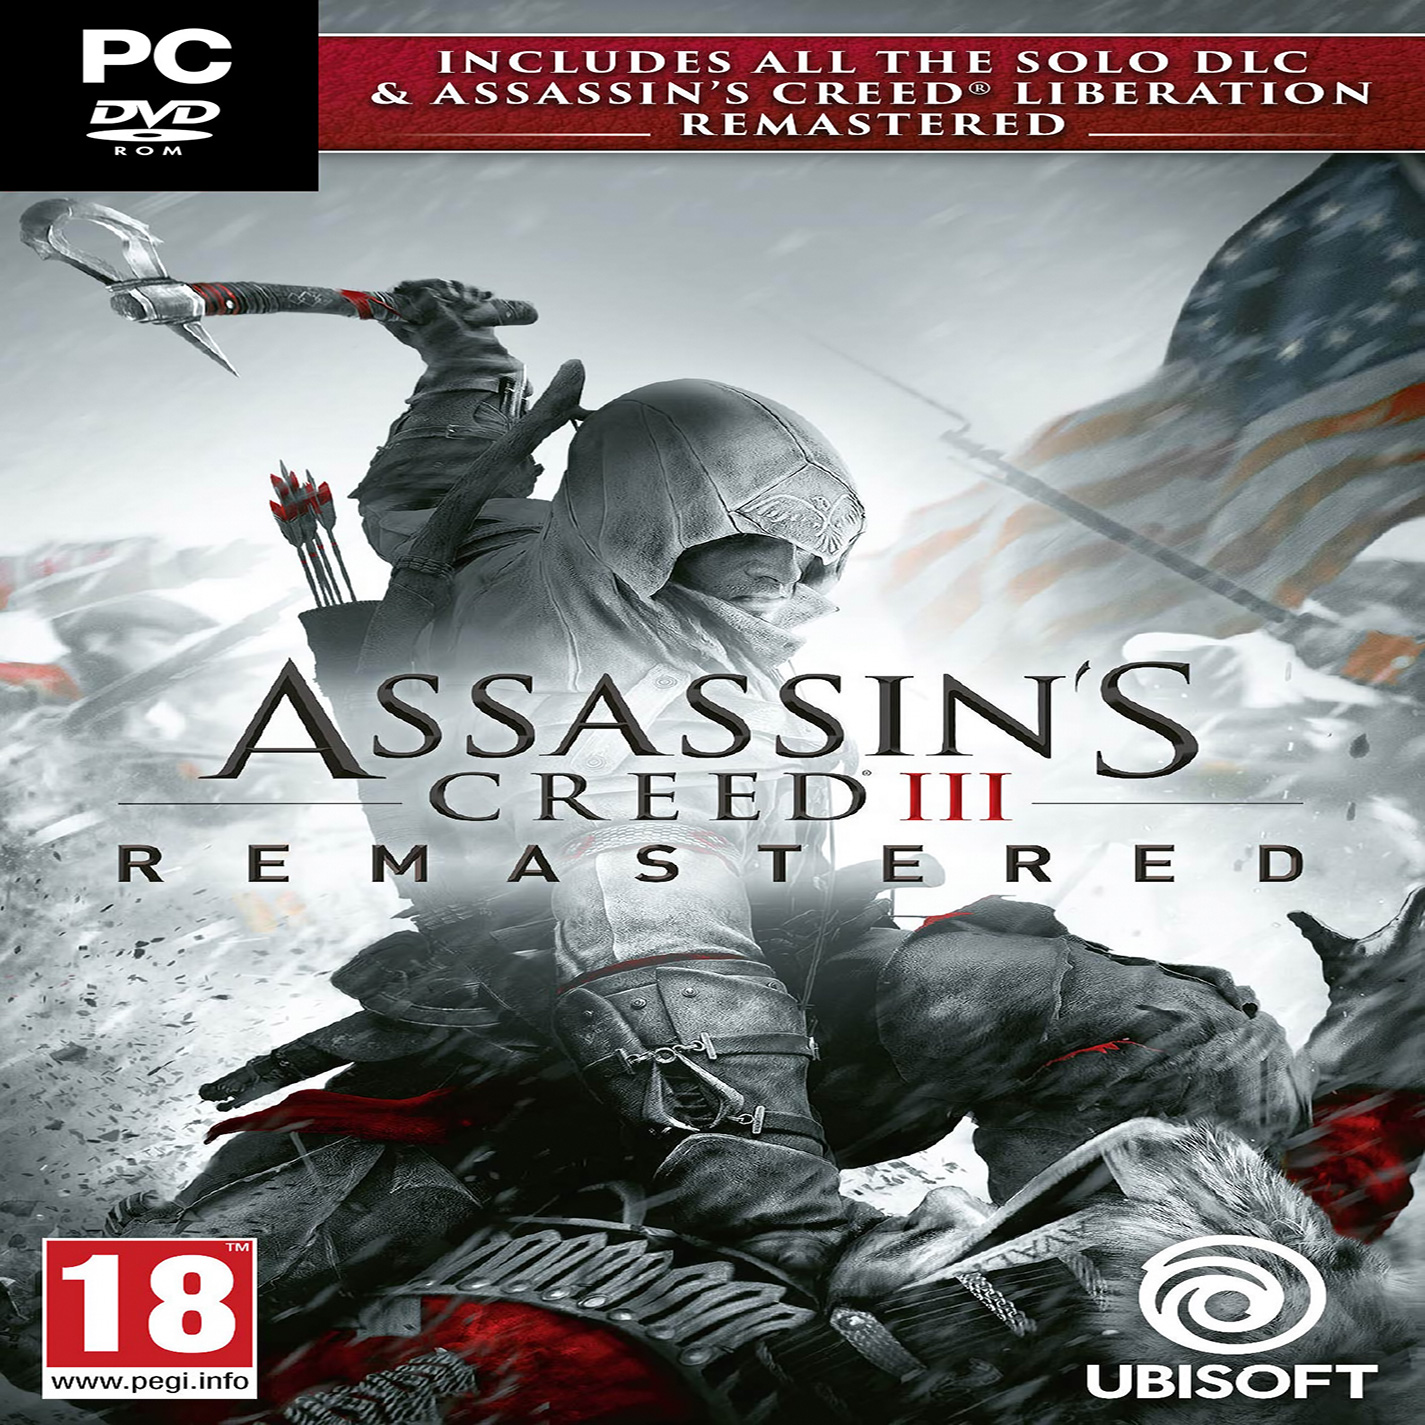 Assassin's Creed III Remastered - predn CD obal